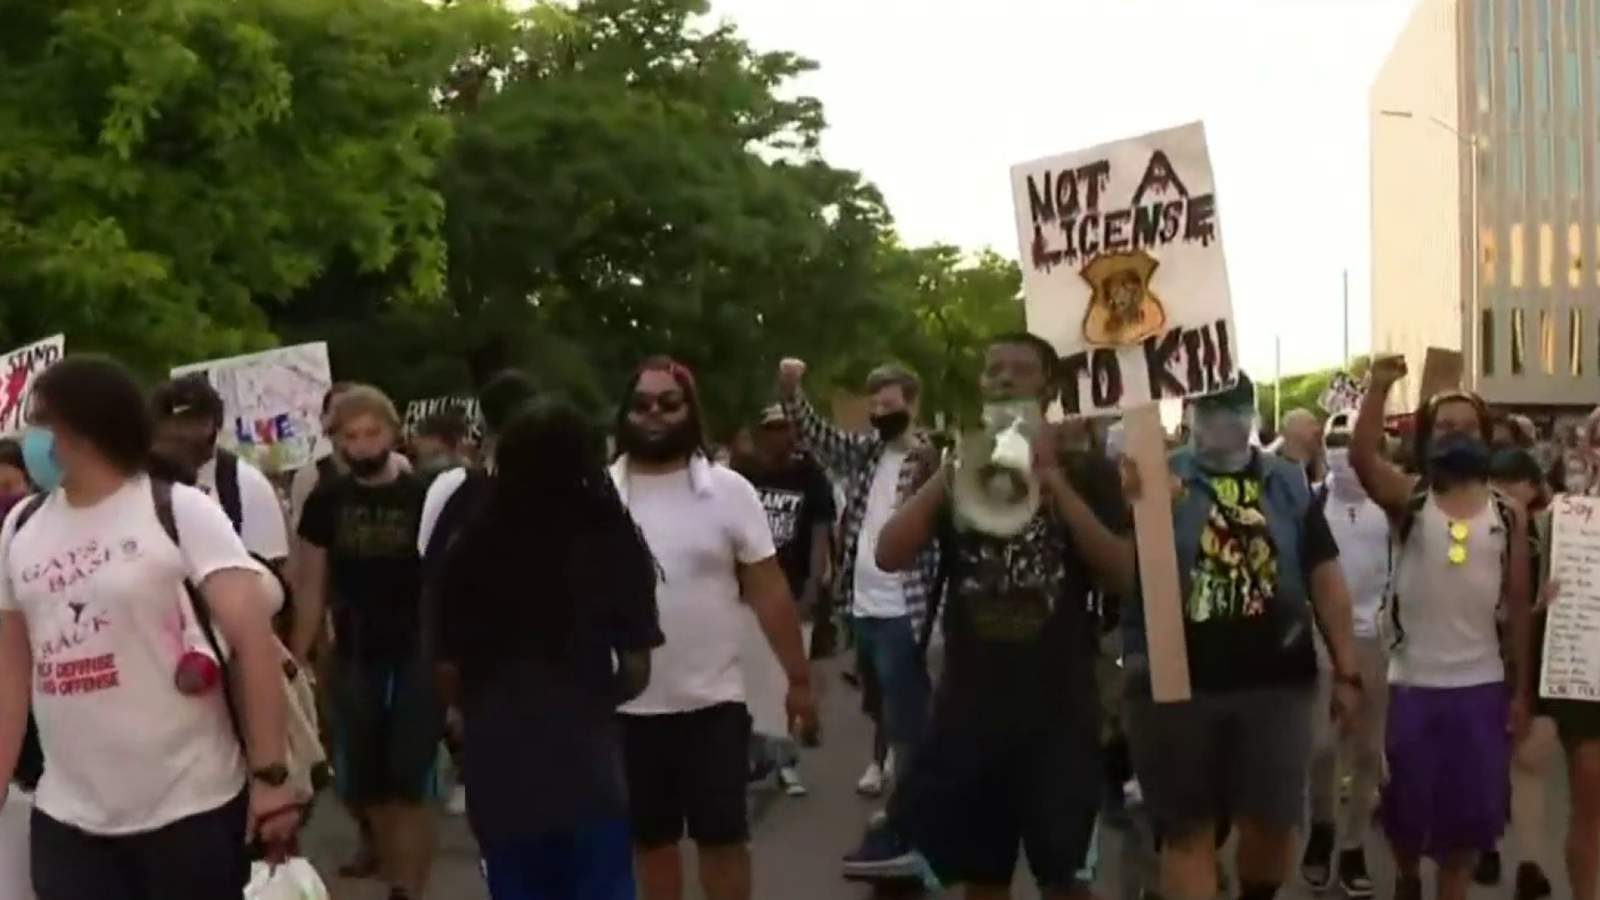 Protests against racial injustice, police brutality held in Detroit for 8th straight night